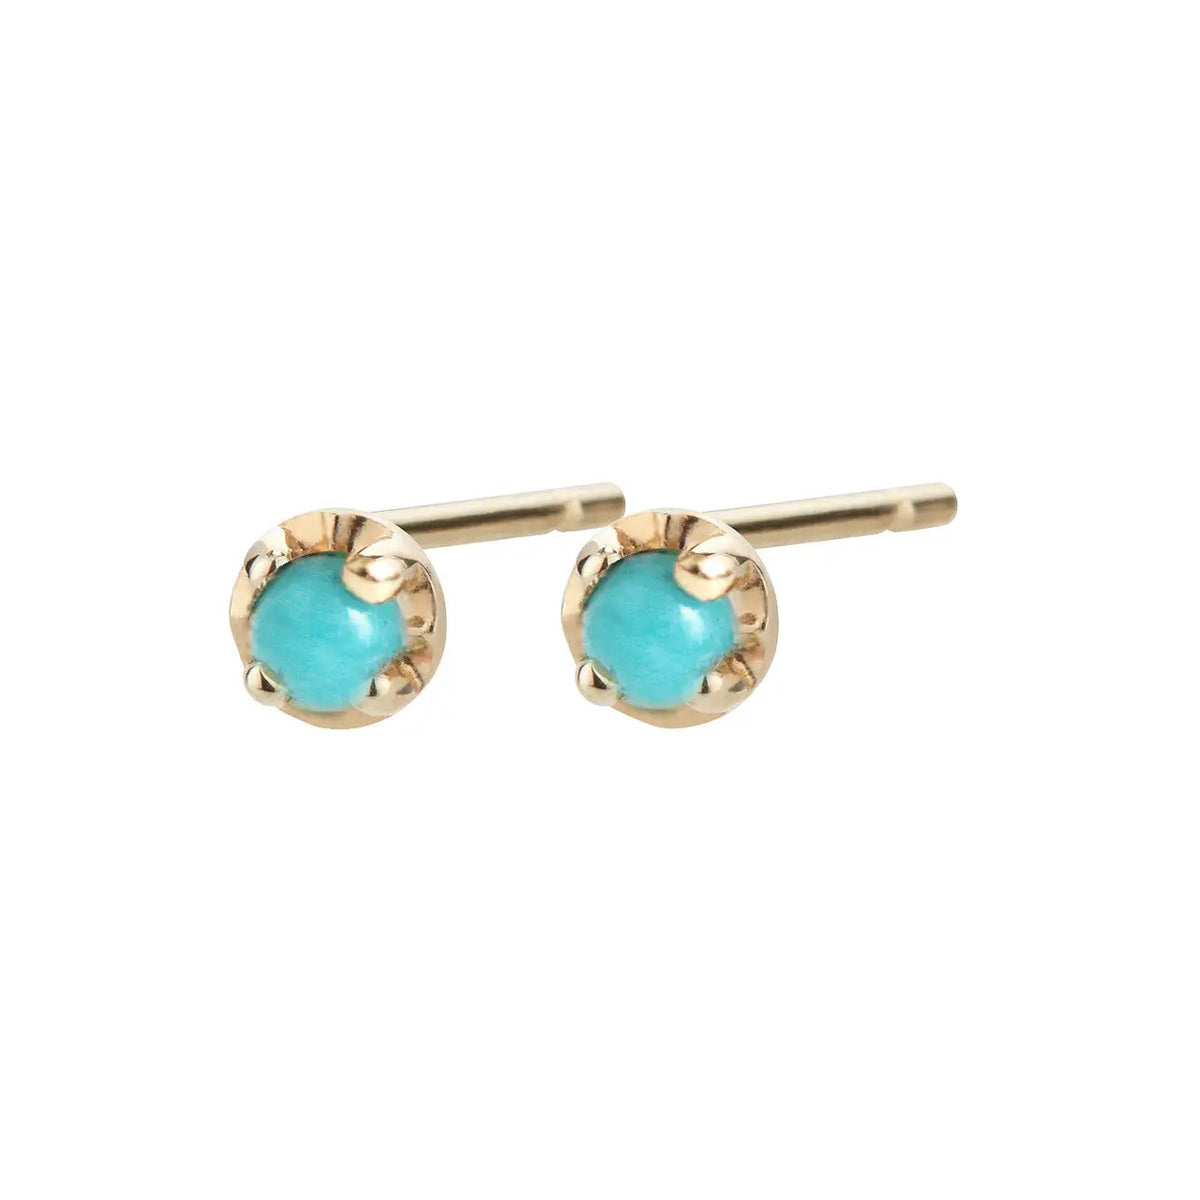 Turquoise droplets set in 14k yellow gold prongs. Dainty and delicate.   14k yellow gold earrings  Sold as a pair  Diameter of Setting: 3.75 mm  Aili Jewelry is made in New York City from recycled metals provided by sustainable certified companies and conflict free diamonds.